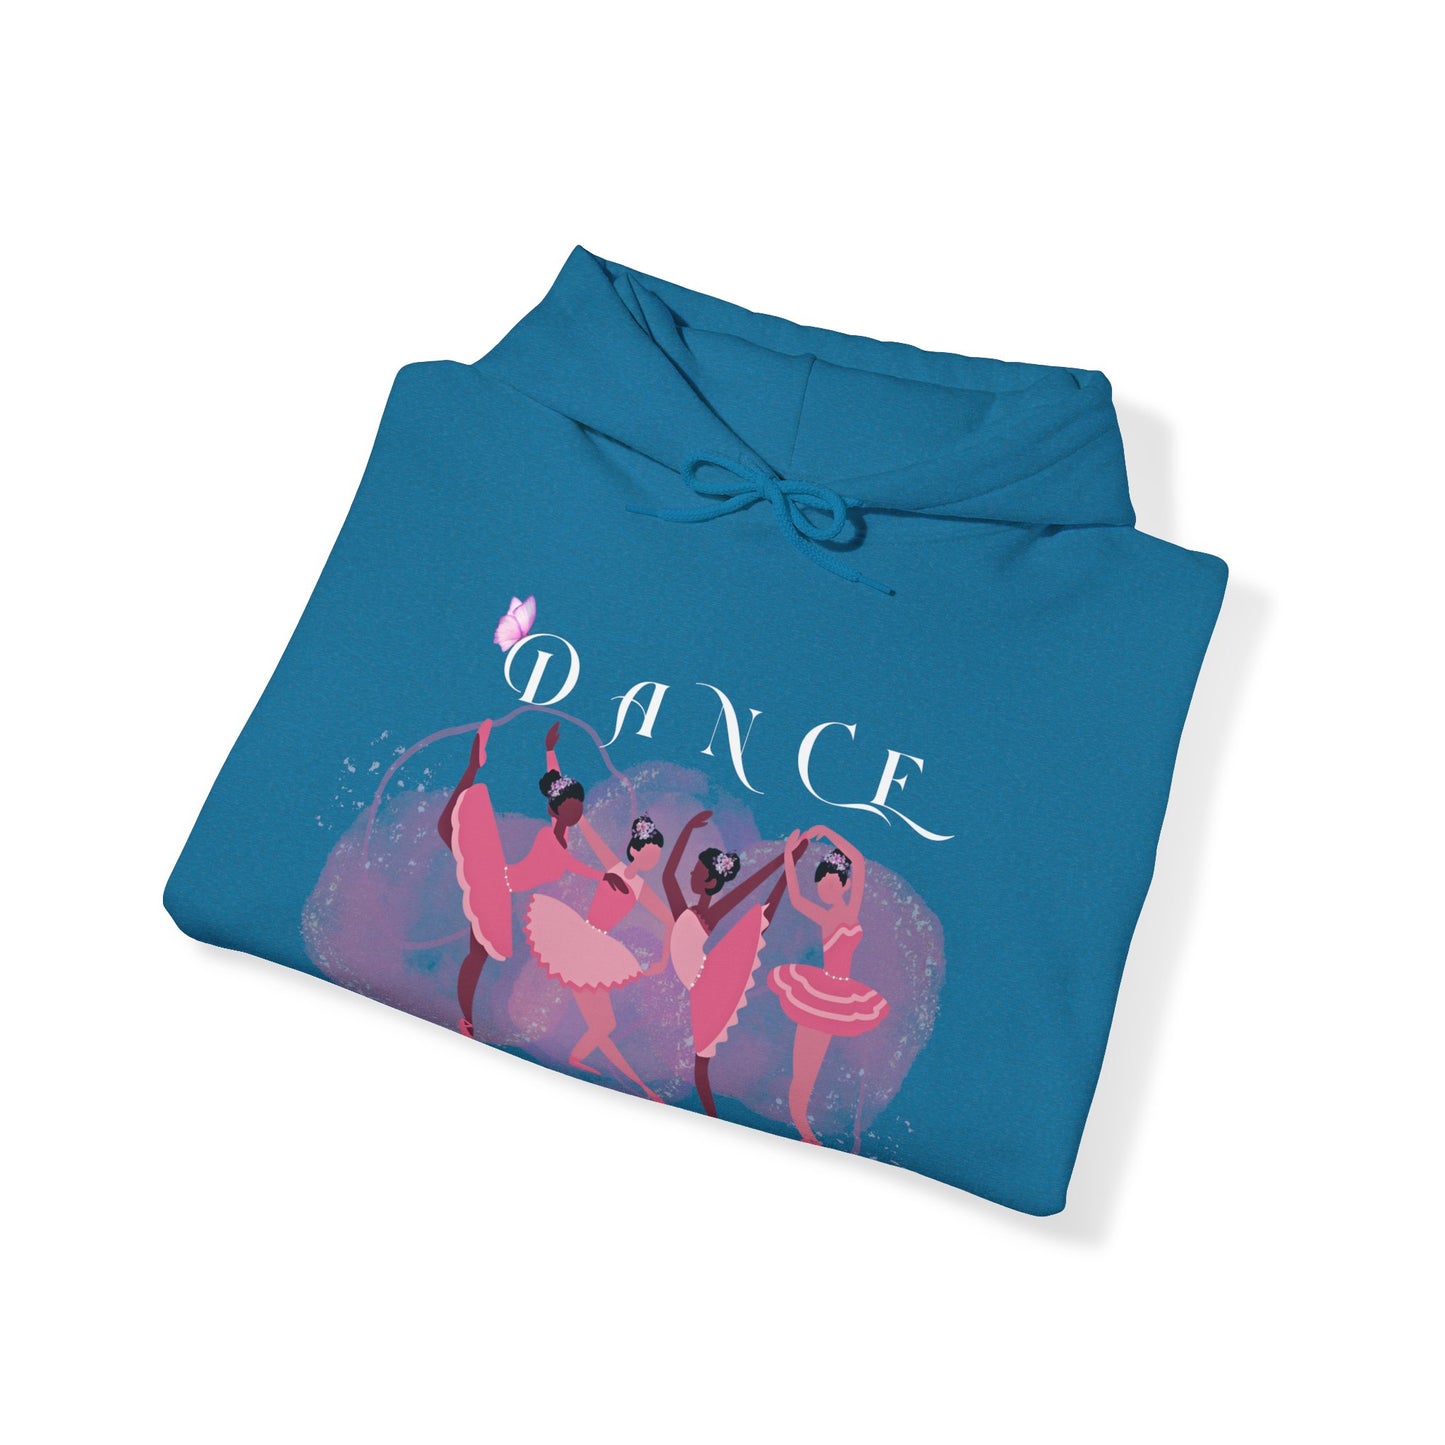 Hooded Sweatshirt - Dance with Passion